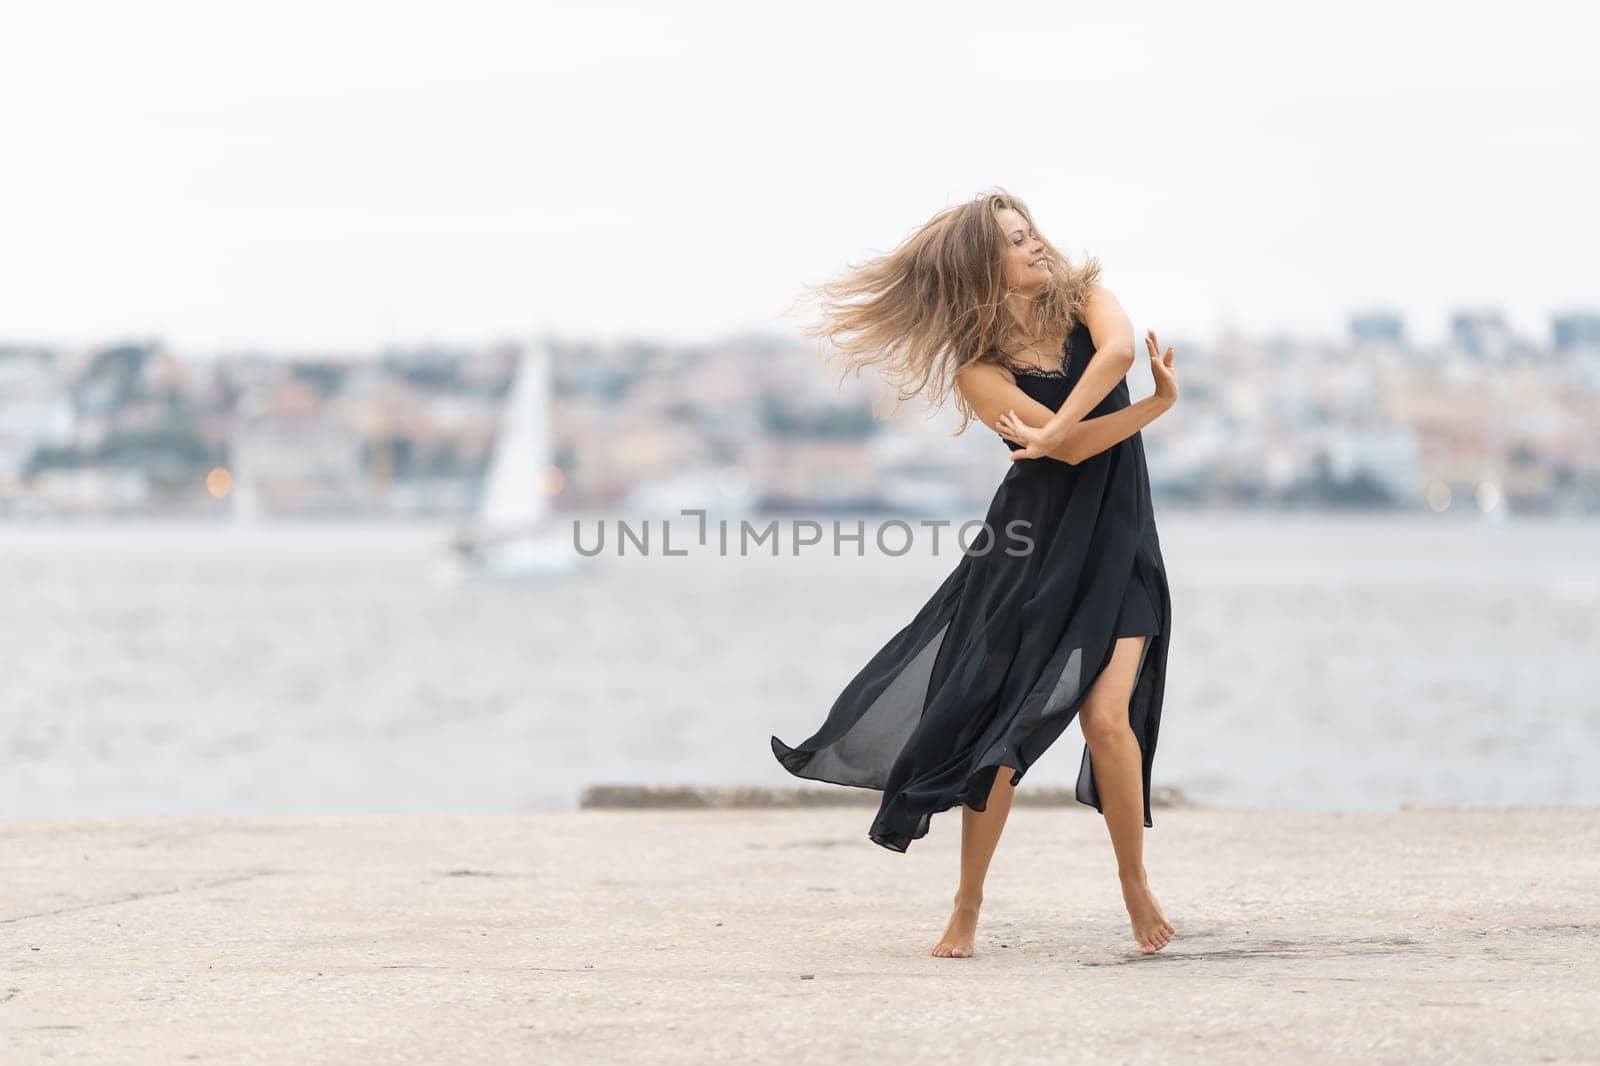 An adult smiling woman in black dress dancing on the pier in cloudy weather by Studia72